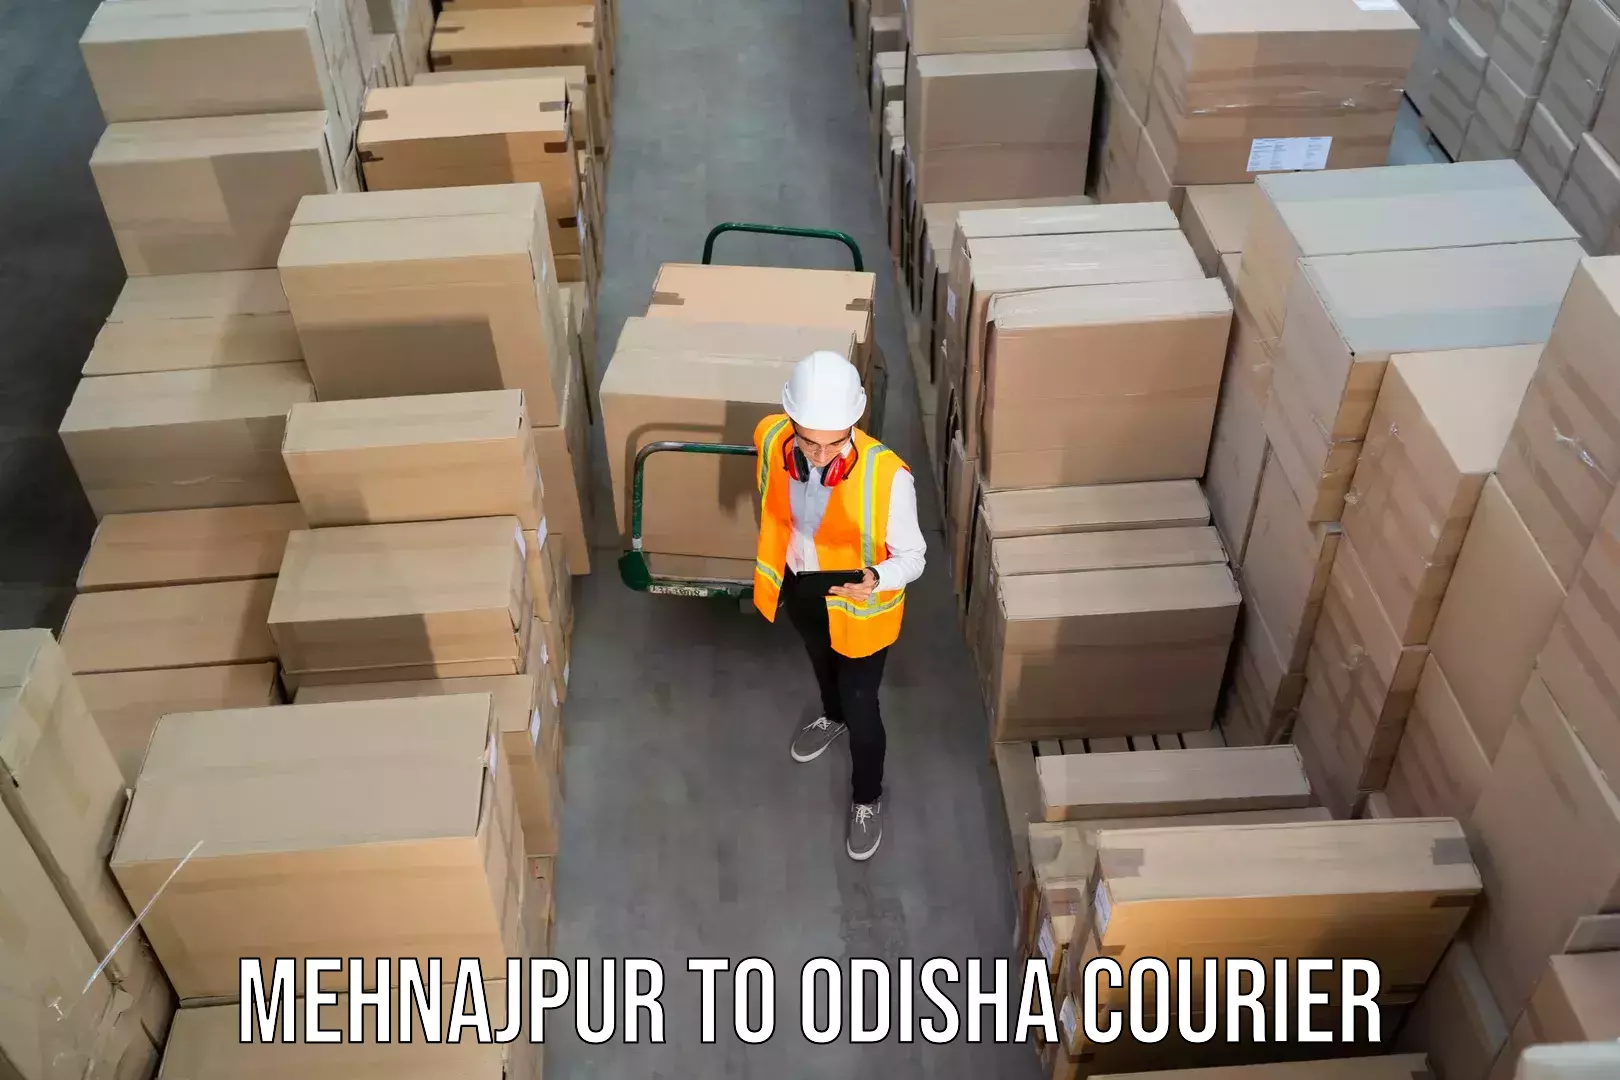 Reliable shipping partners Mehnajpur to Paradip Port